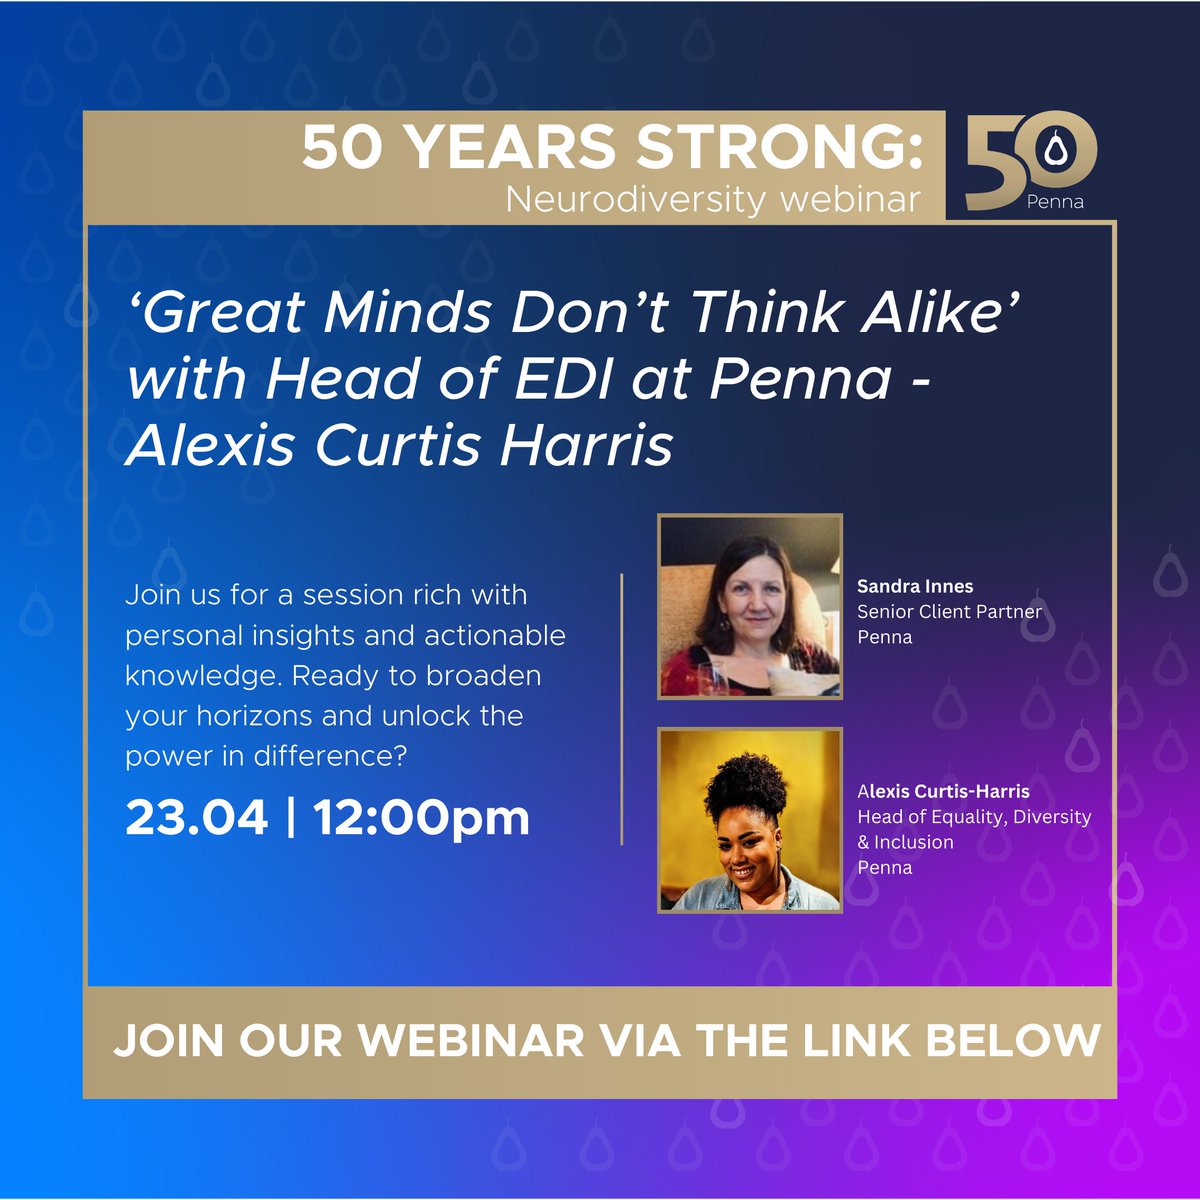 Don't miss our free #Neurodiversity webinar tomorrow! Led by Alexis Curtis-Harris, Head of #EDI at Penna, gain insights and strategies for inclusive workplaces. Ready to revolutionise talent and inclusion? Register now >> bit.ly/GreatMinds24